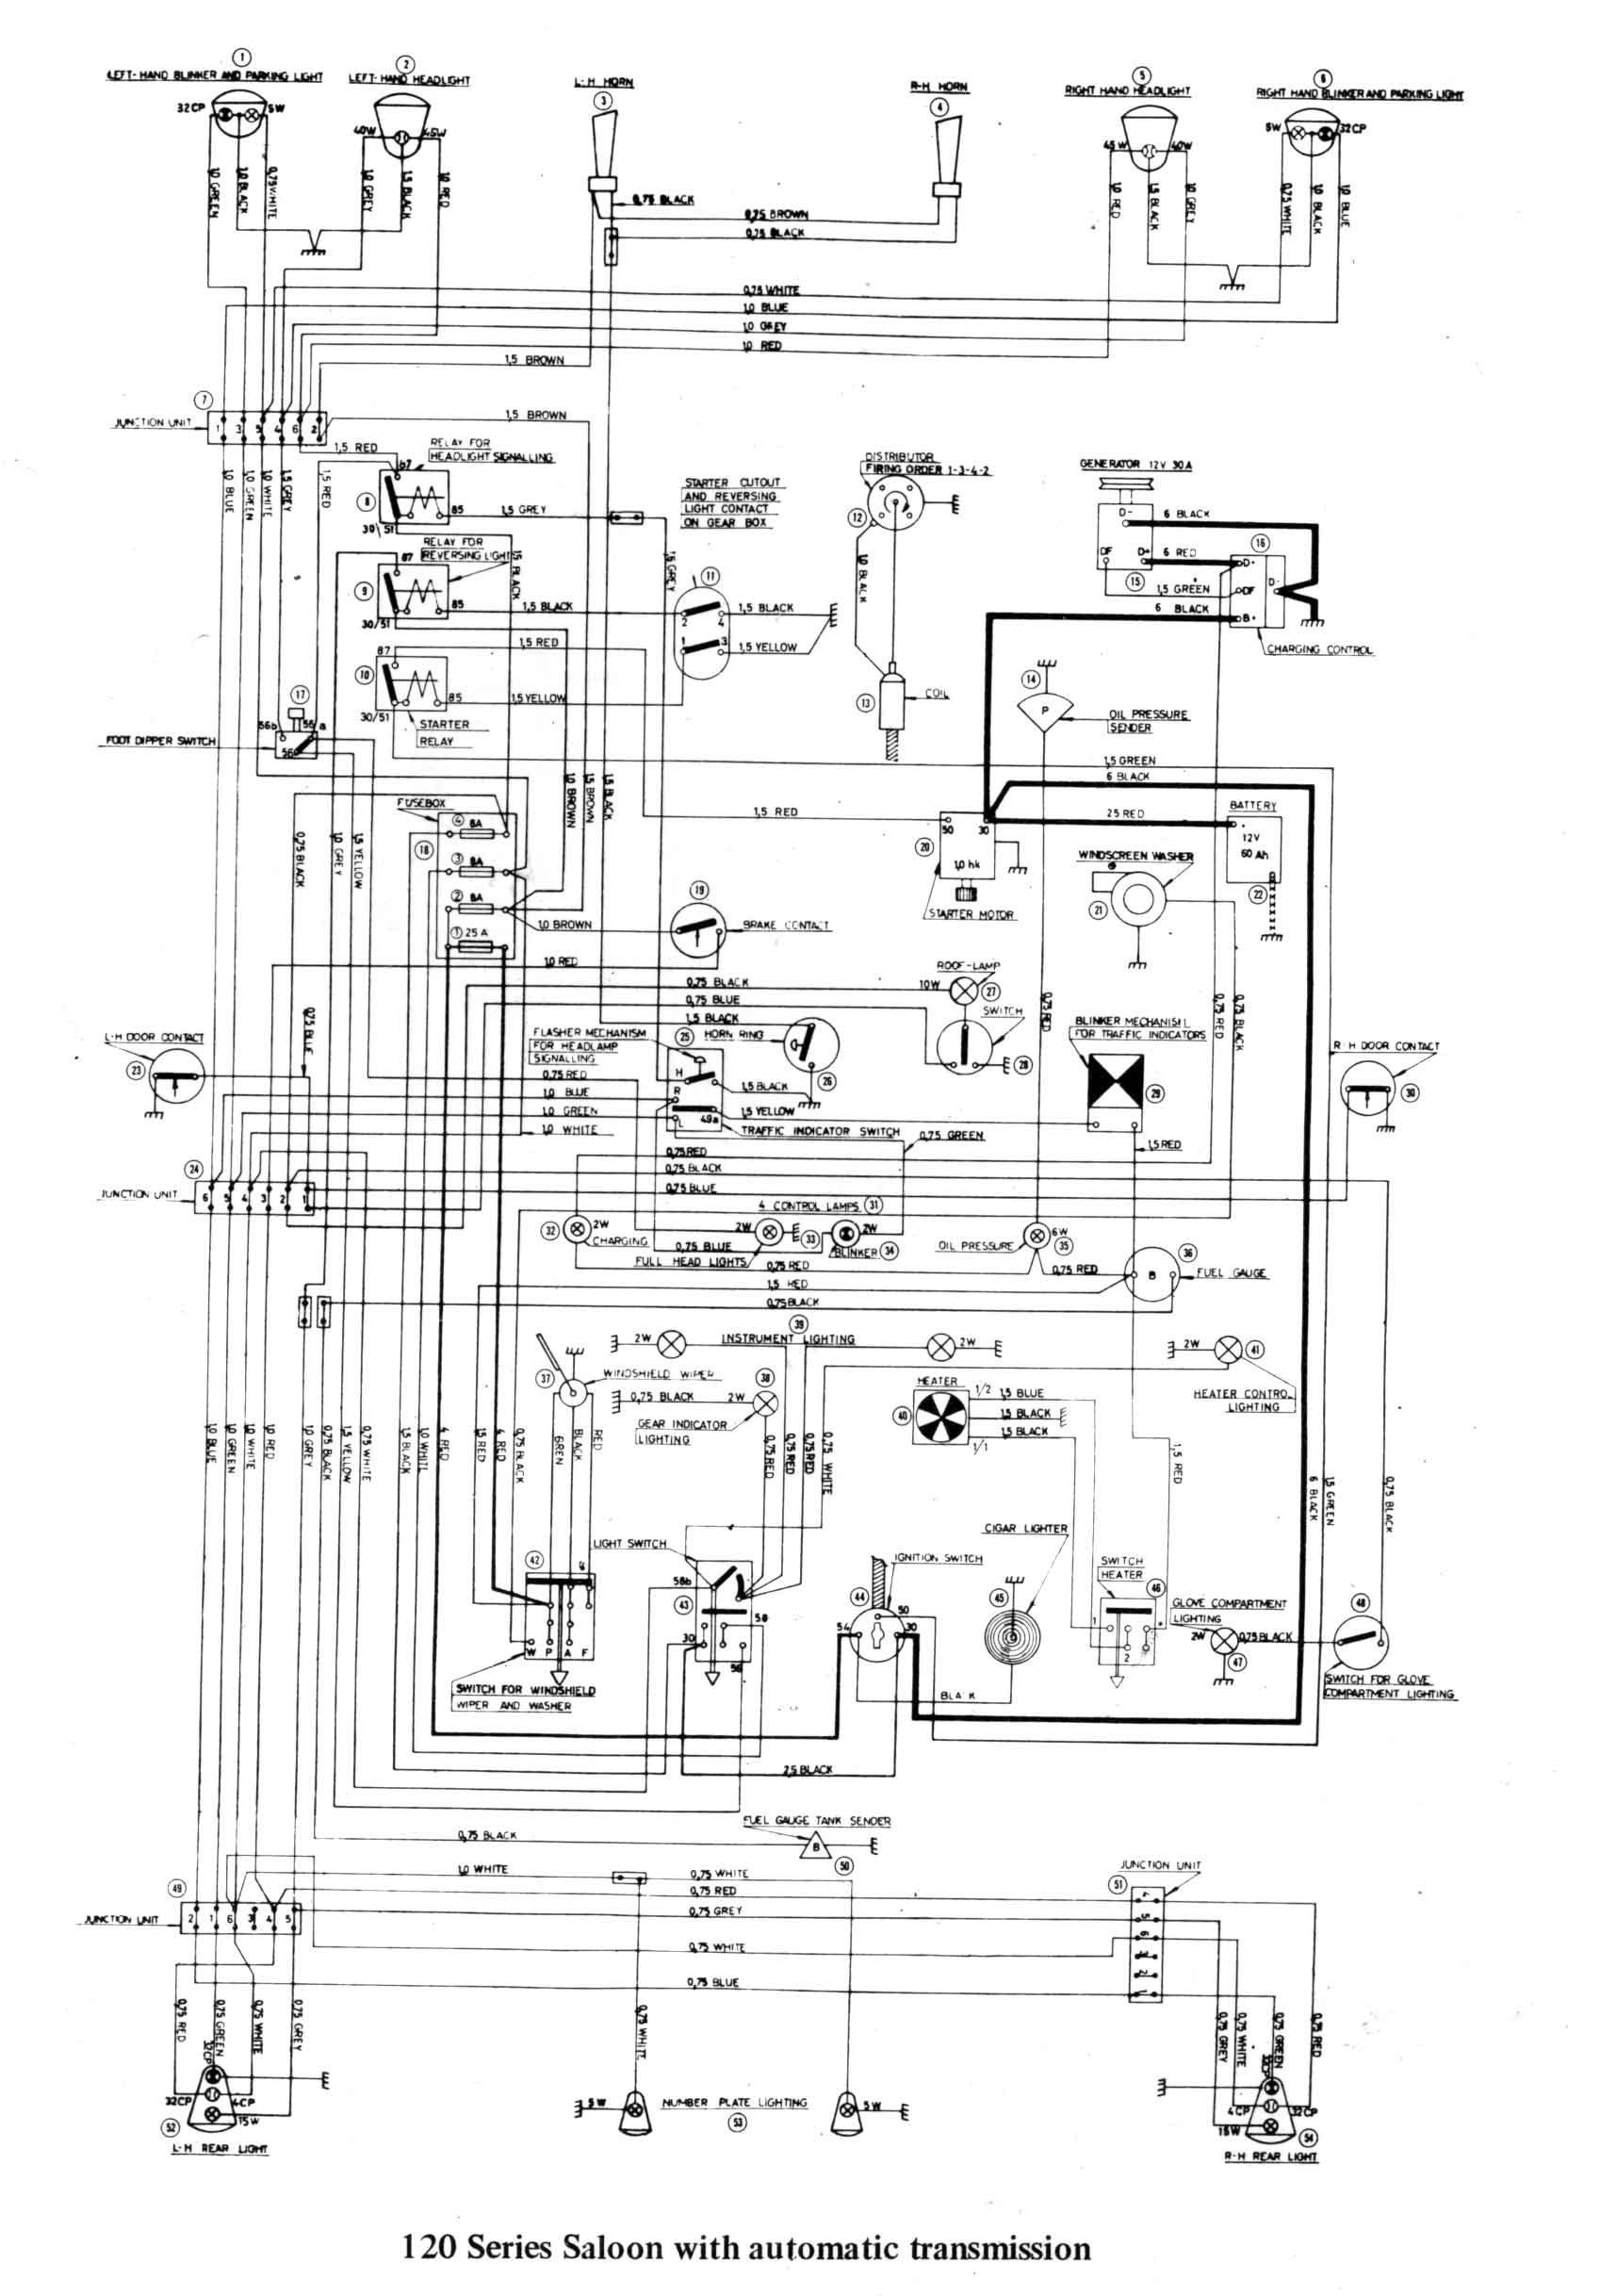 Wiring Diagrams for Yamaha Golf Carts Valid Ezgo Wiring Diagram Unique Starter Wiring Diagram Elegant Sw